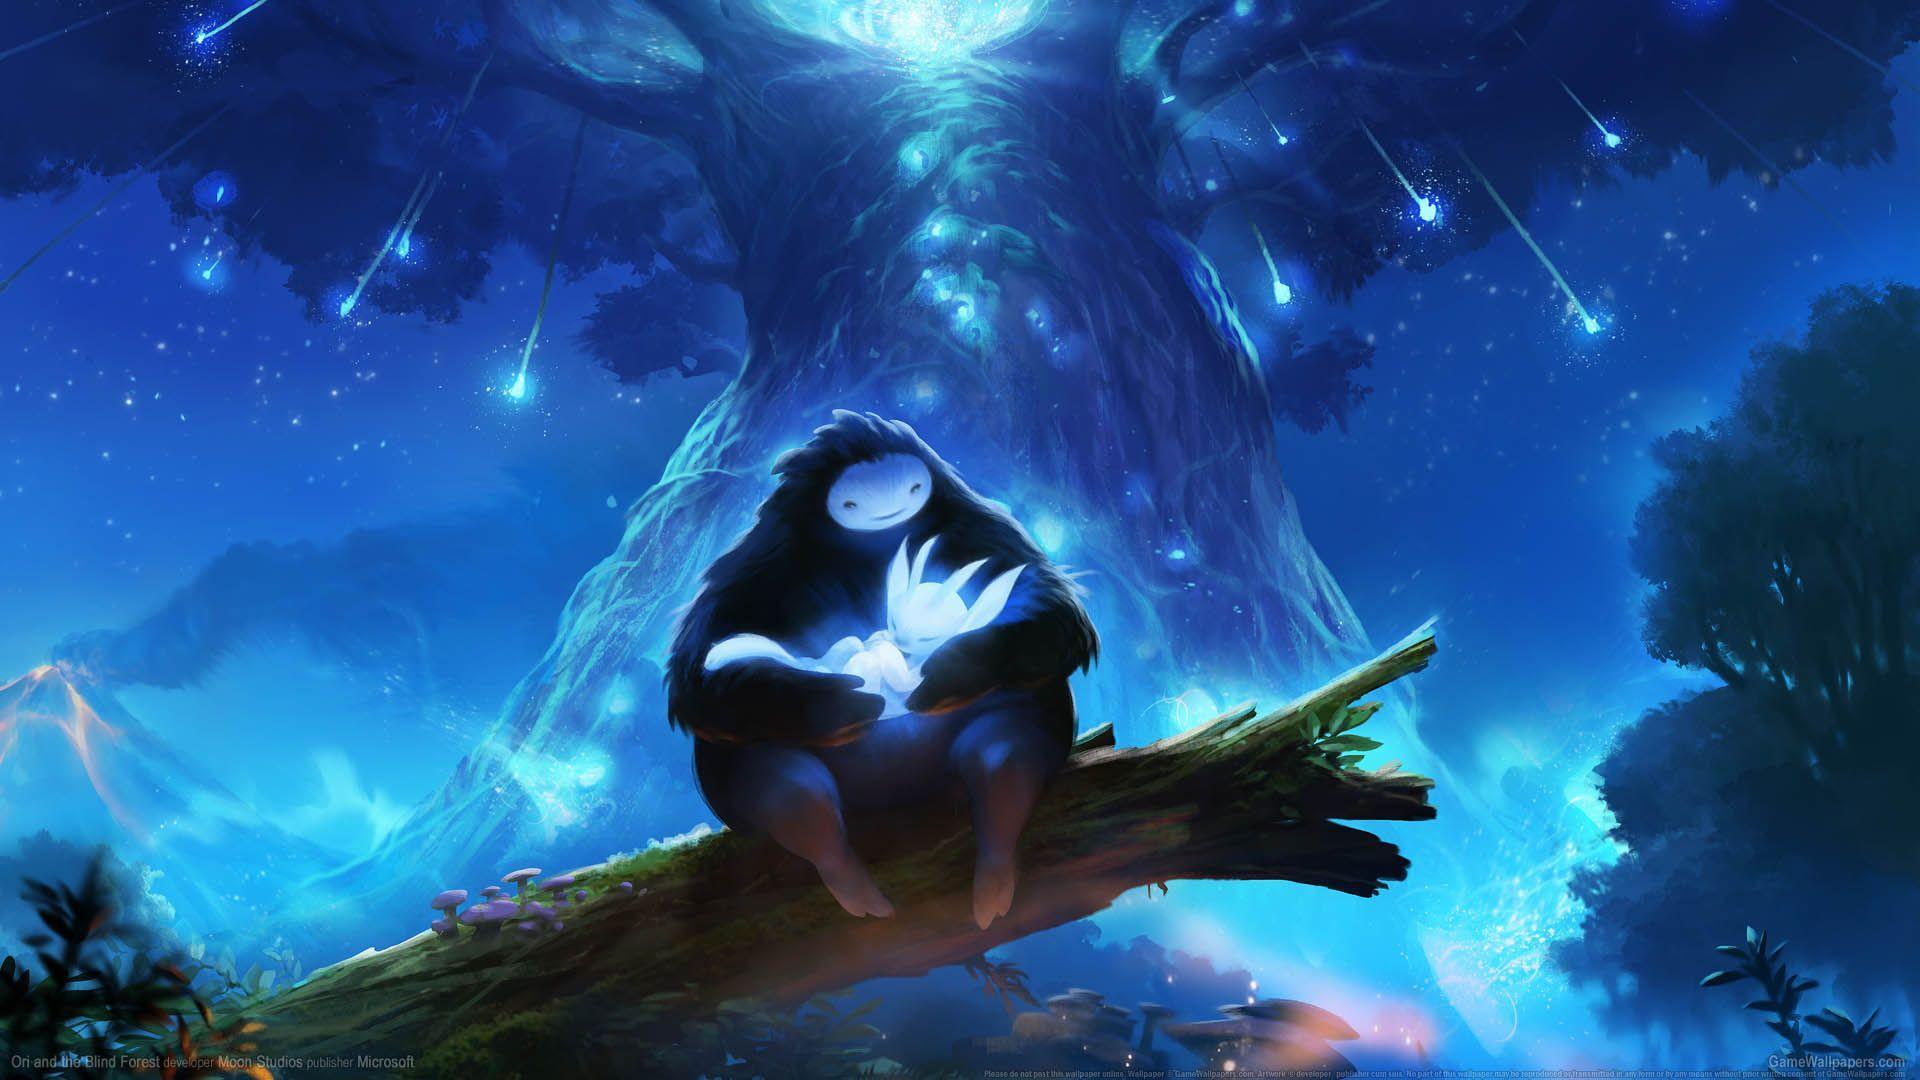 Ori Windows Theme Featuring 14 wallpapers creating a day and night cycle  complemented by sounds and custom cursor  rOriAndTheBlindForest